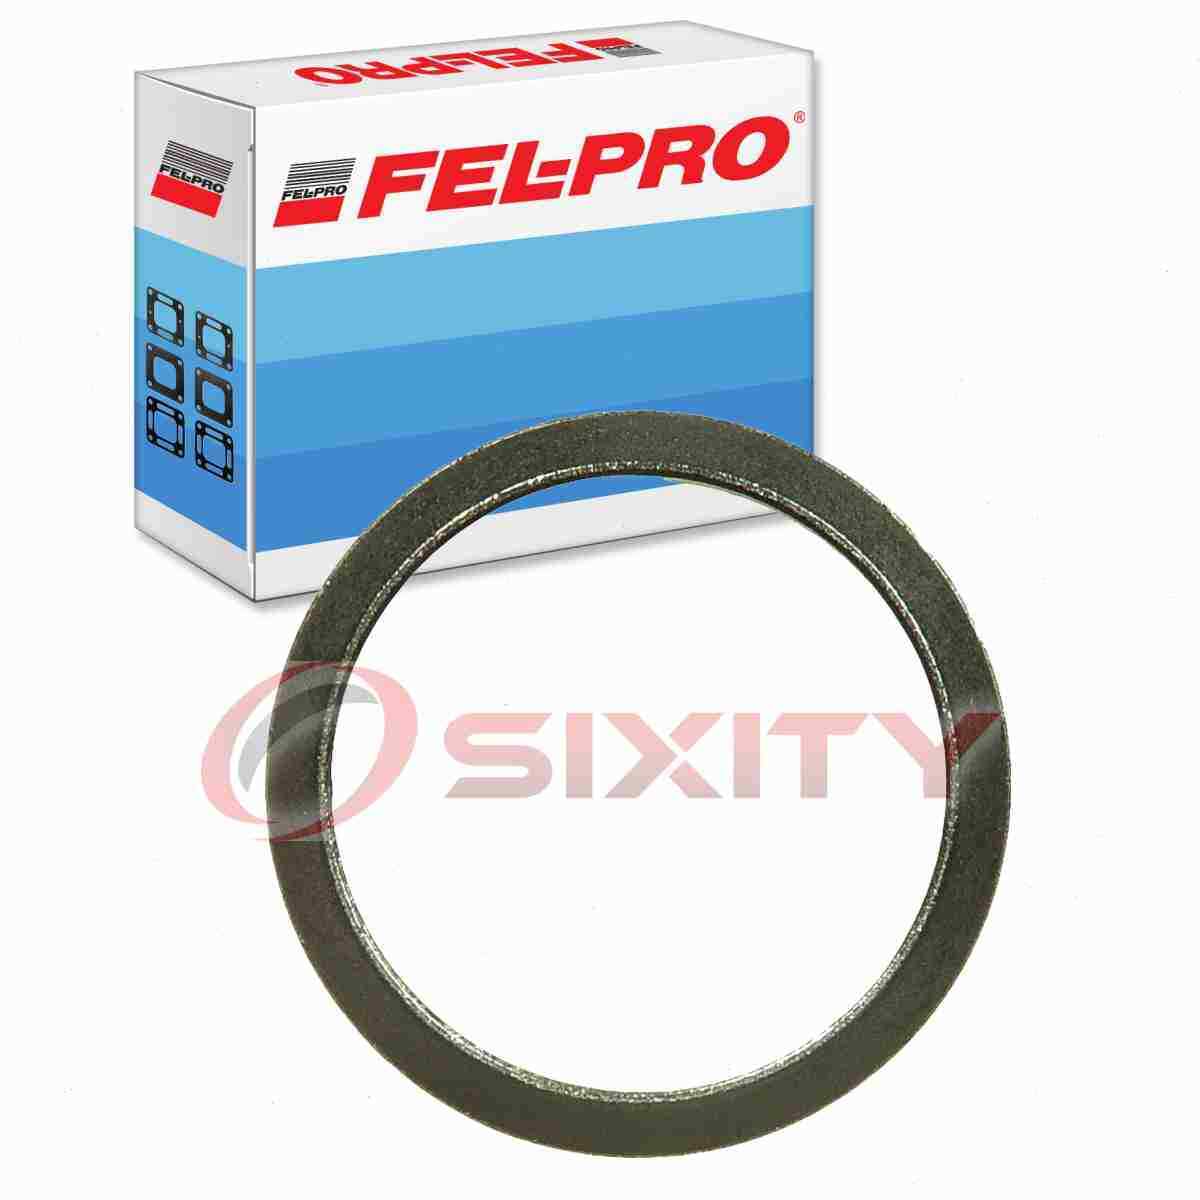 Fel-Pro Exhaust Pipe Flange Gasket for 1978-1980 Oldsmobile Cutlass Calais xh